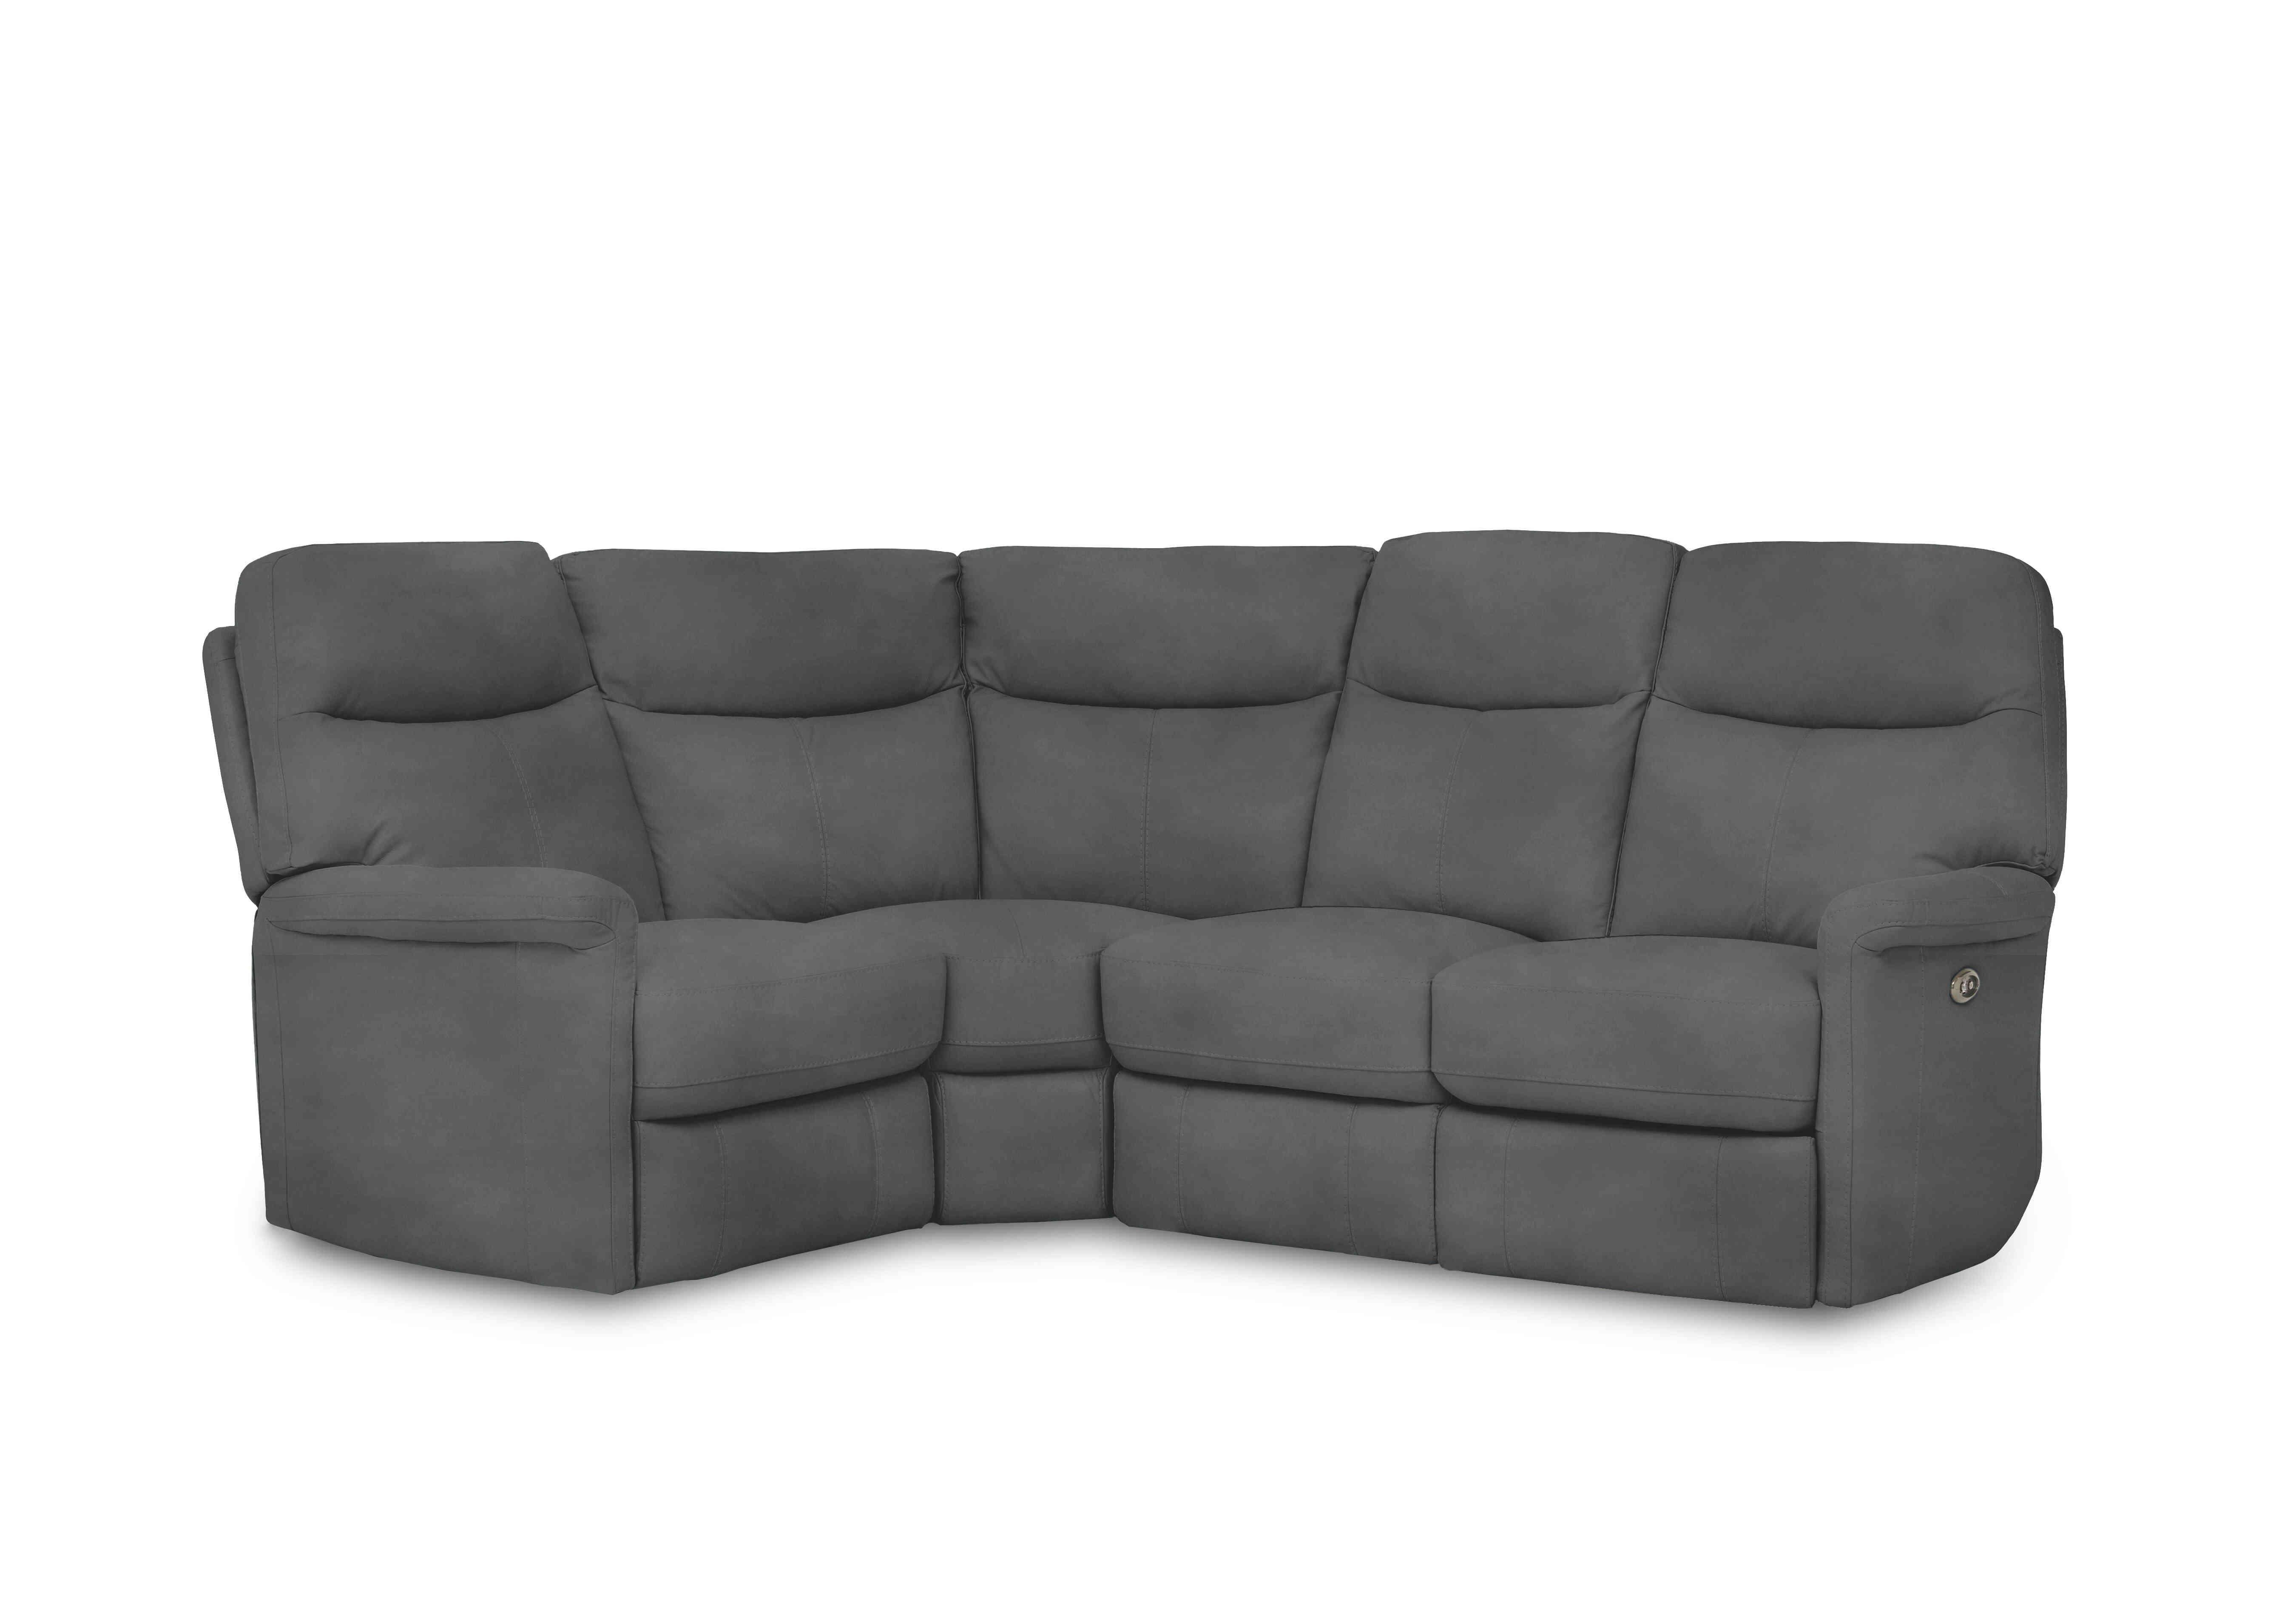 Compact Collection Lille Fabric Corner Sofa in Fab-Meg-R20 Pewter on Furniture Village